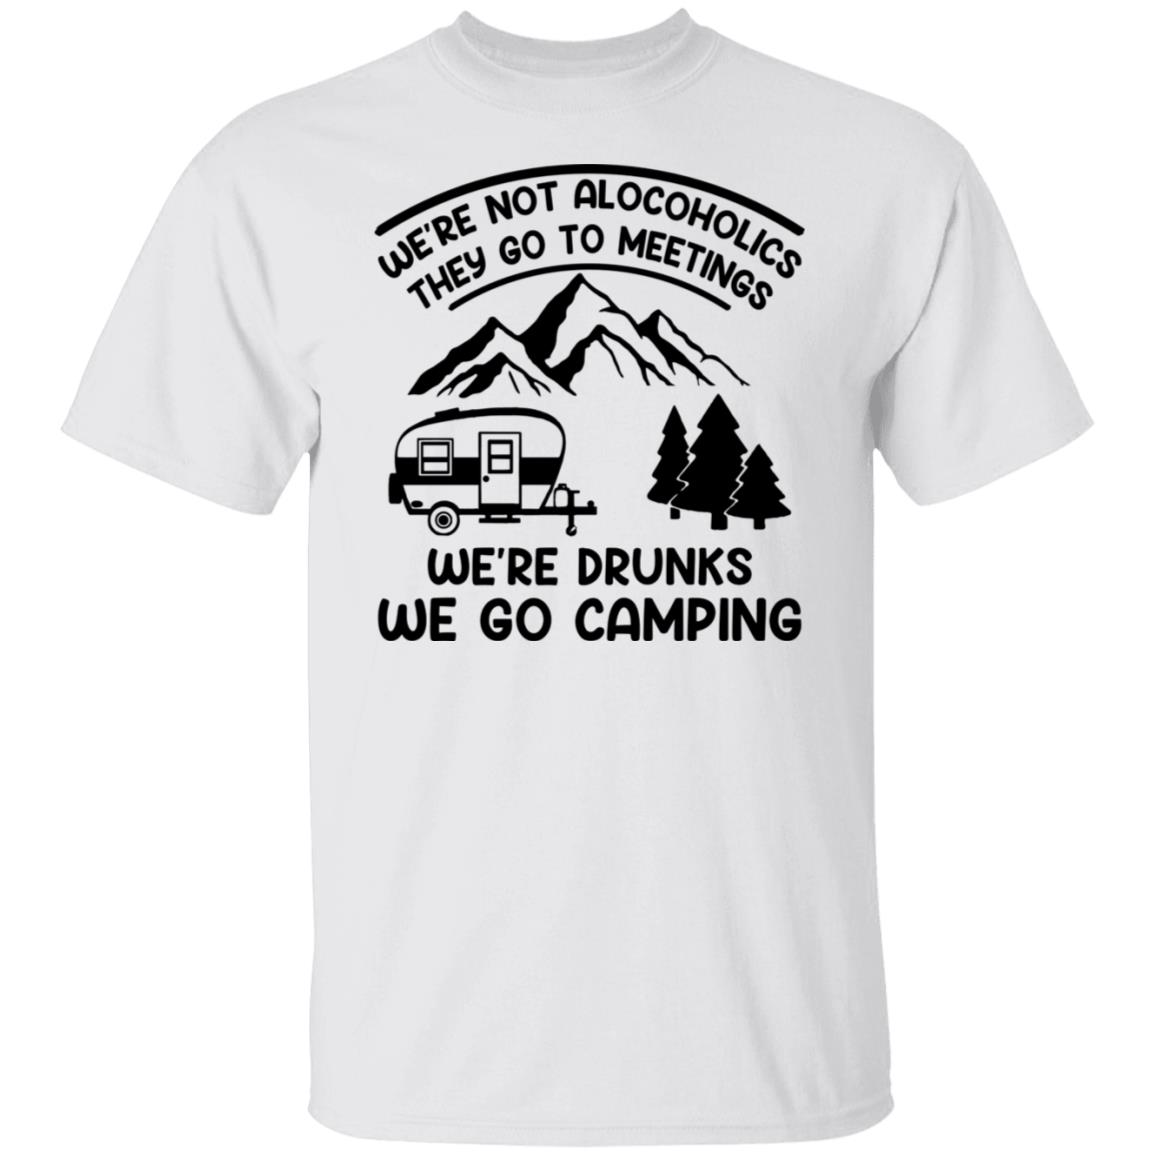 We?re not alcoholics they go to meetings shirt - RobinPlaceFabrics